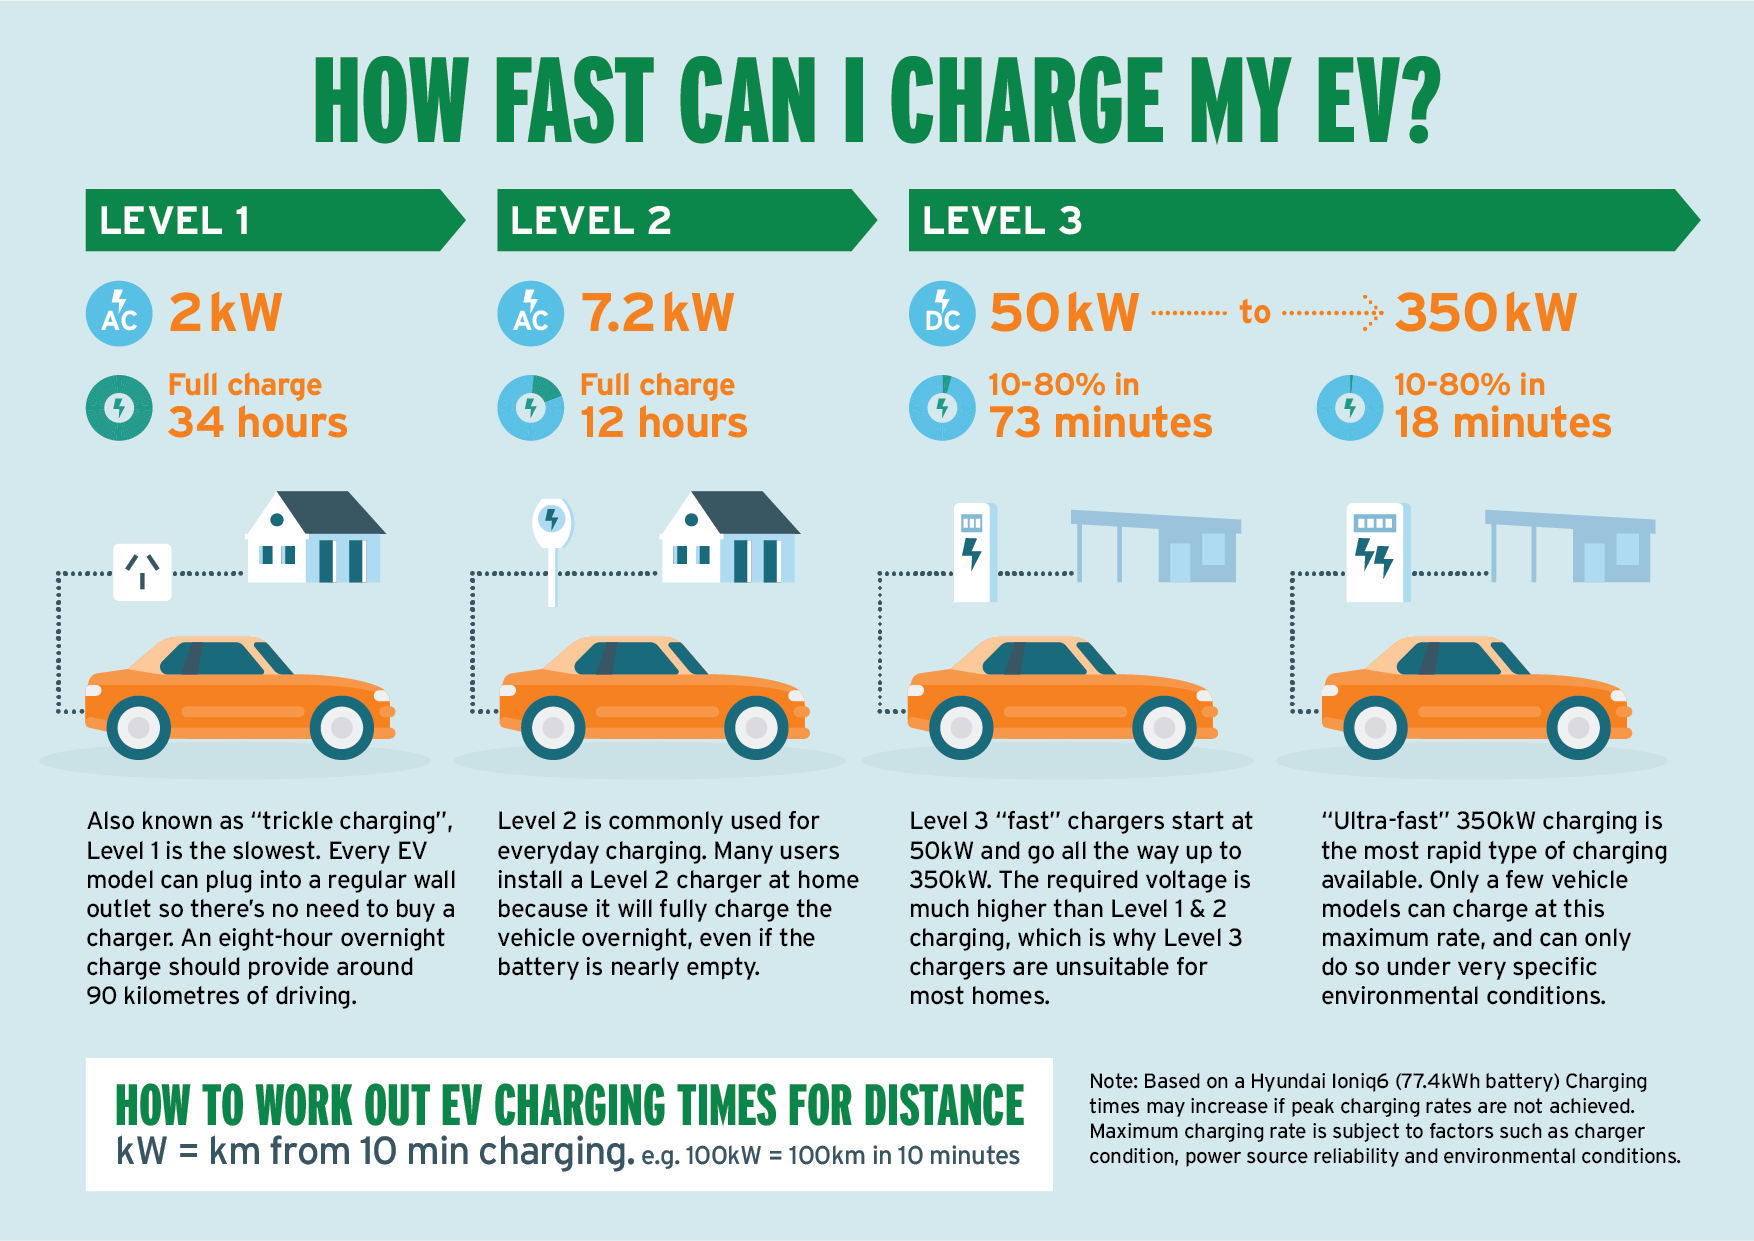 How many kW is fast charging?